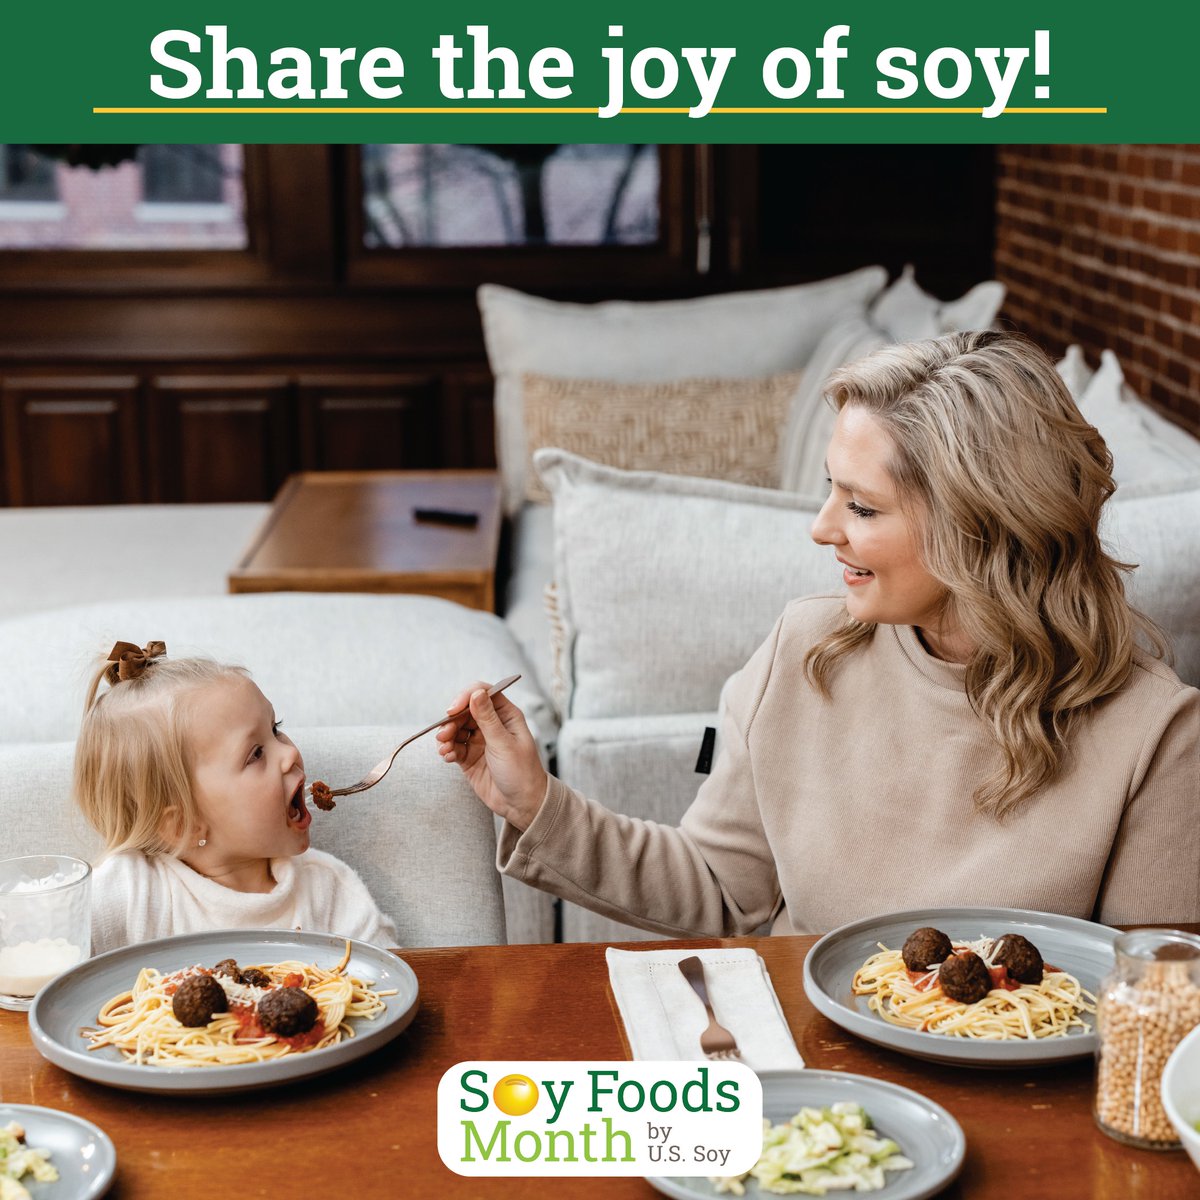 Happy Soy Foods Month! Whether you love tofu, edamame, or soy-based beverages and entrees, share the joy of #soy with your family and friends this month and beyond. 🌱